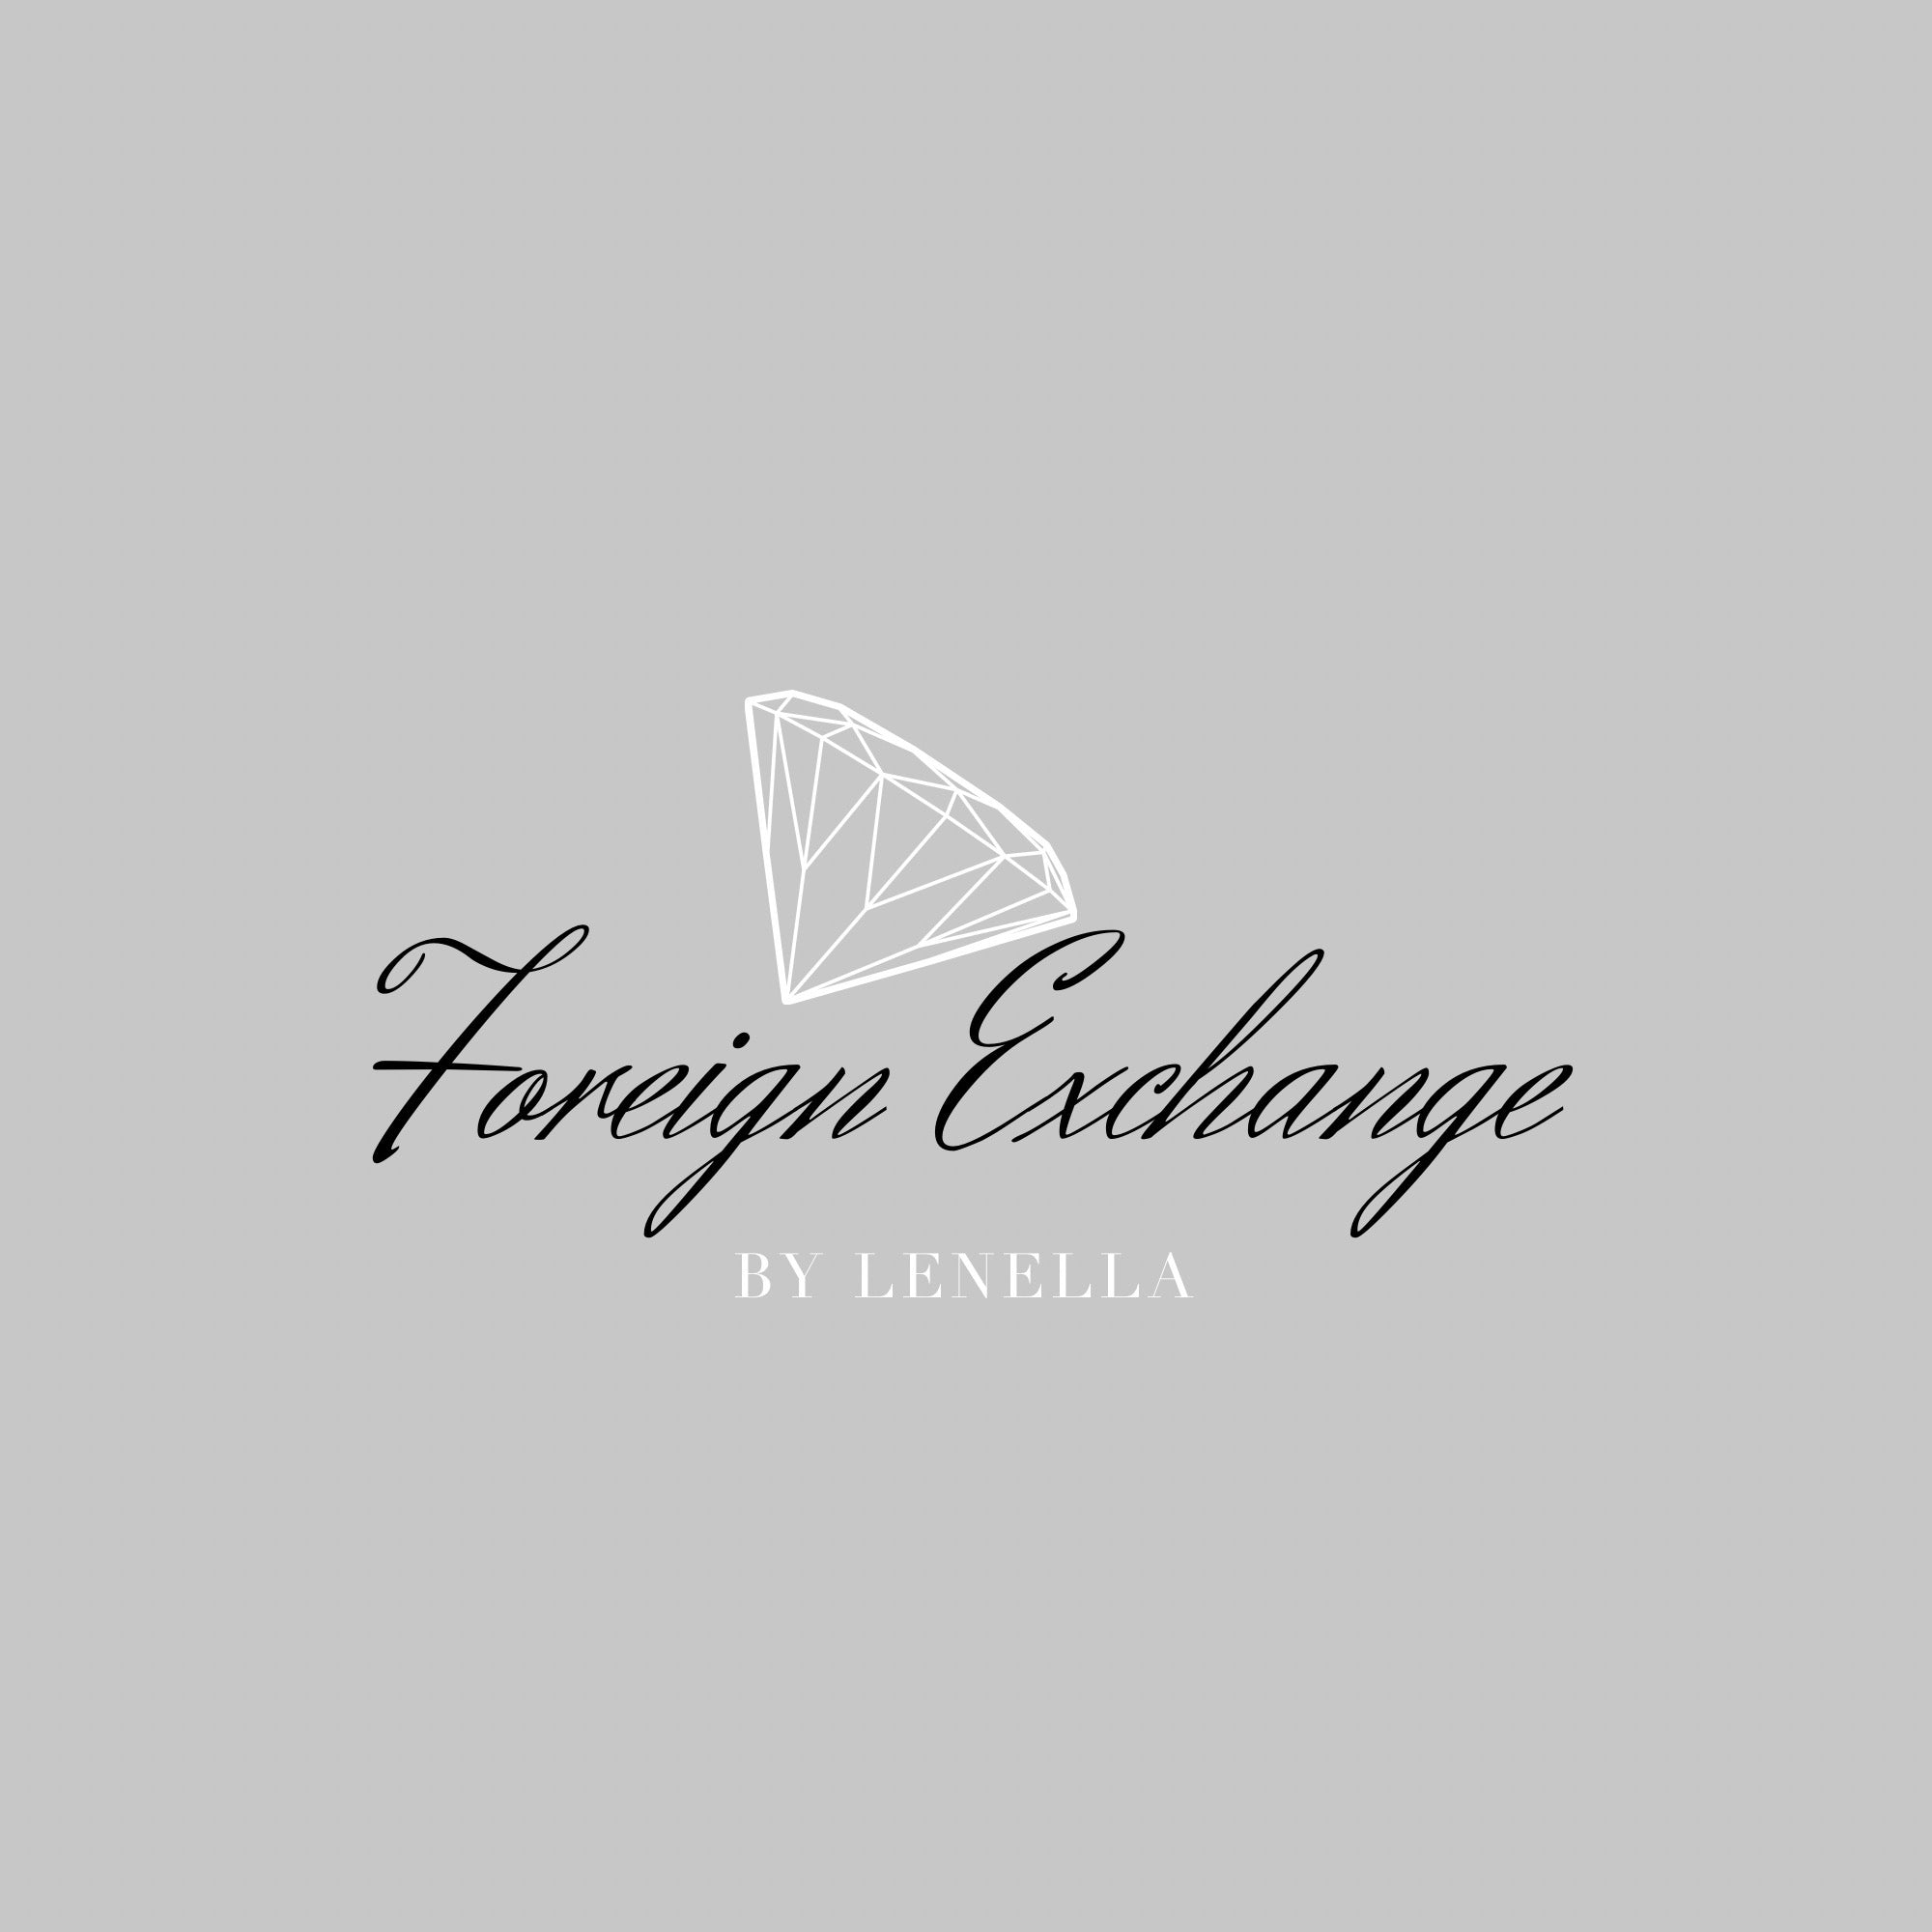 Foreign Exchange by Lenella